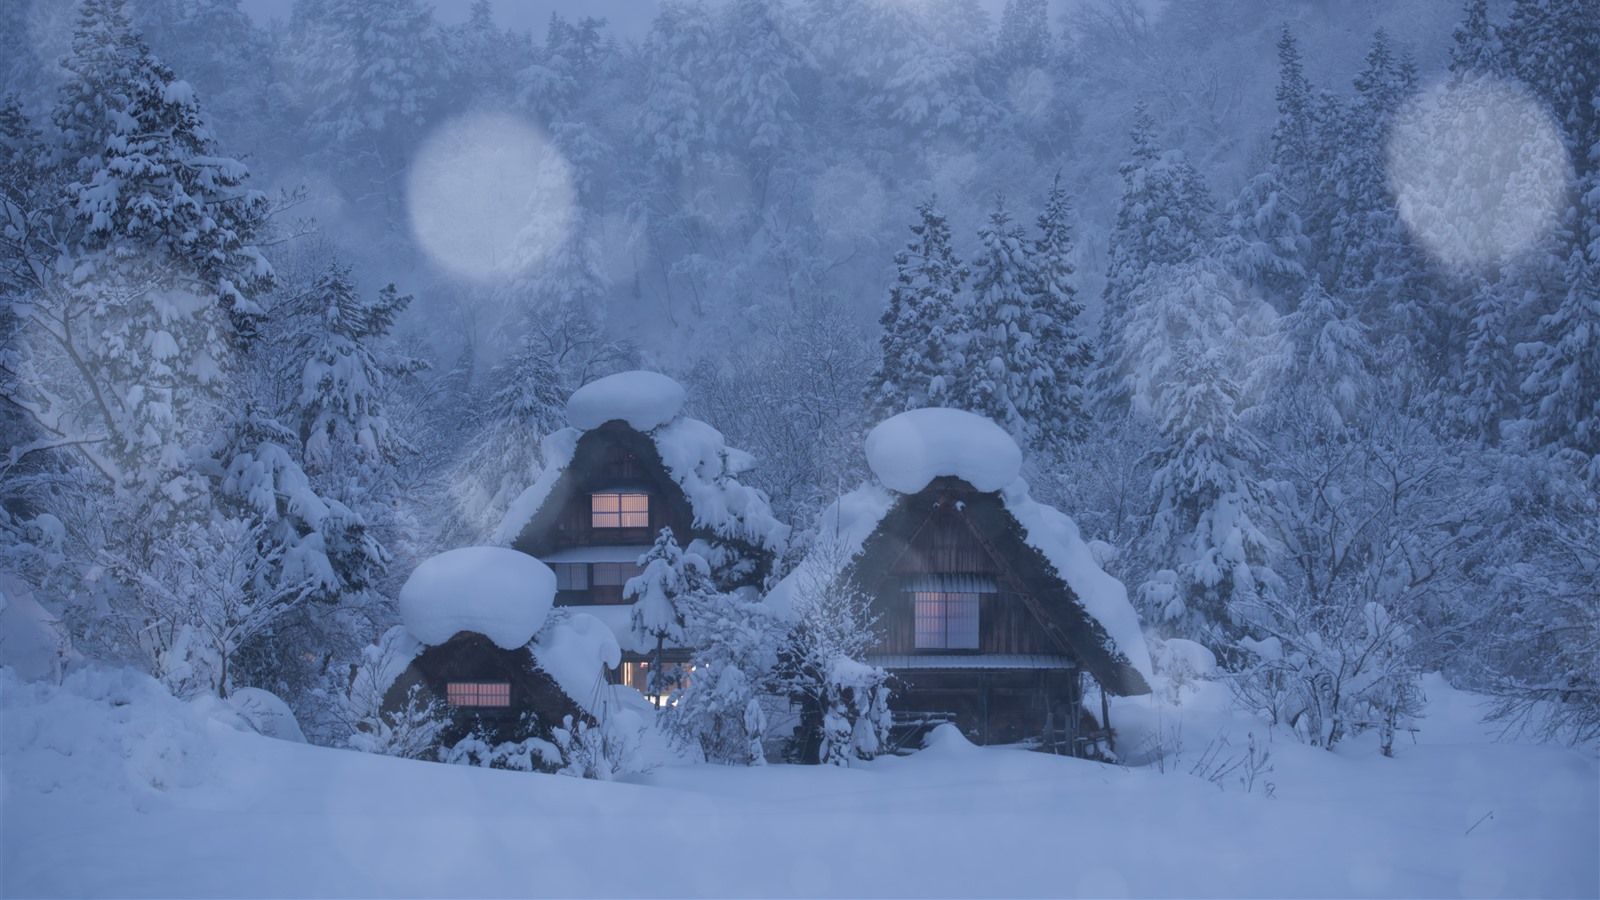 Japan, Shirakawa Go, Village, Houses, Trees, Thick Snow, Winter 1242x2688 IPhone 11 Pro XS Max Wallpaper, Background, Picture, Image